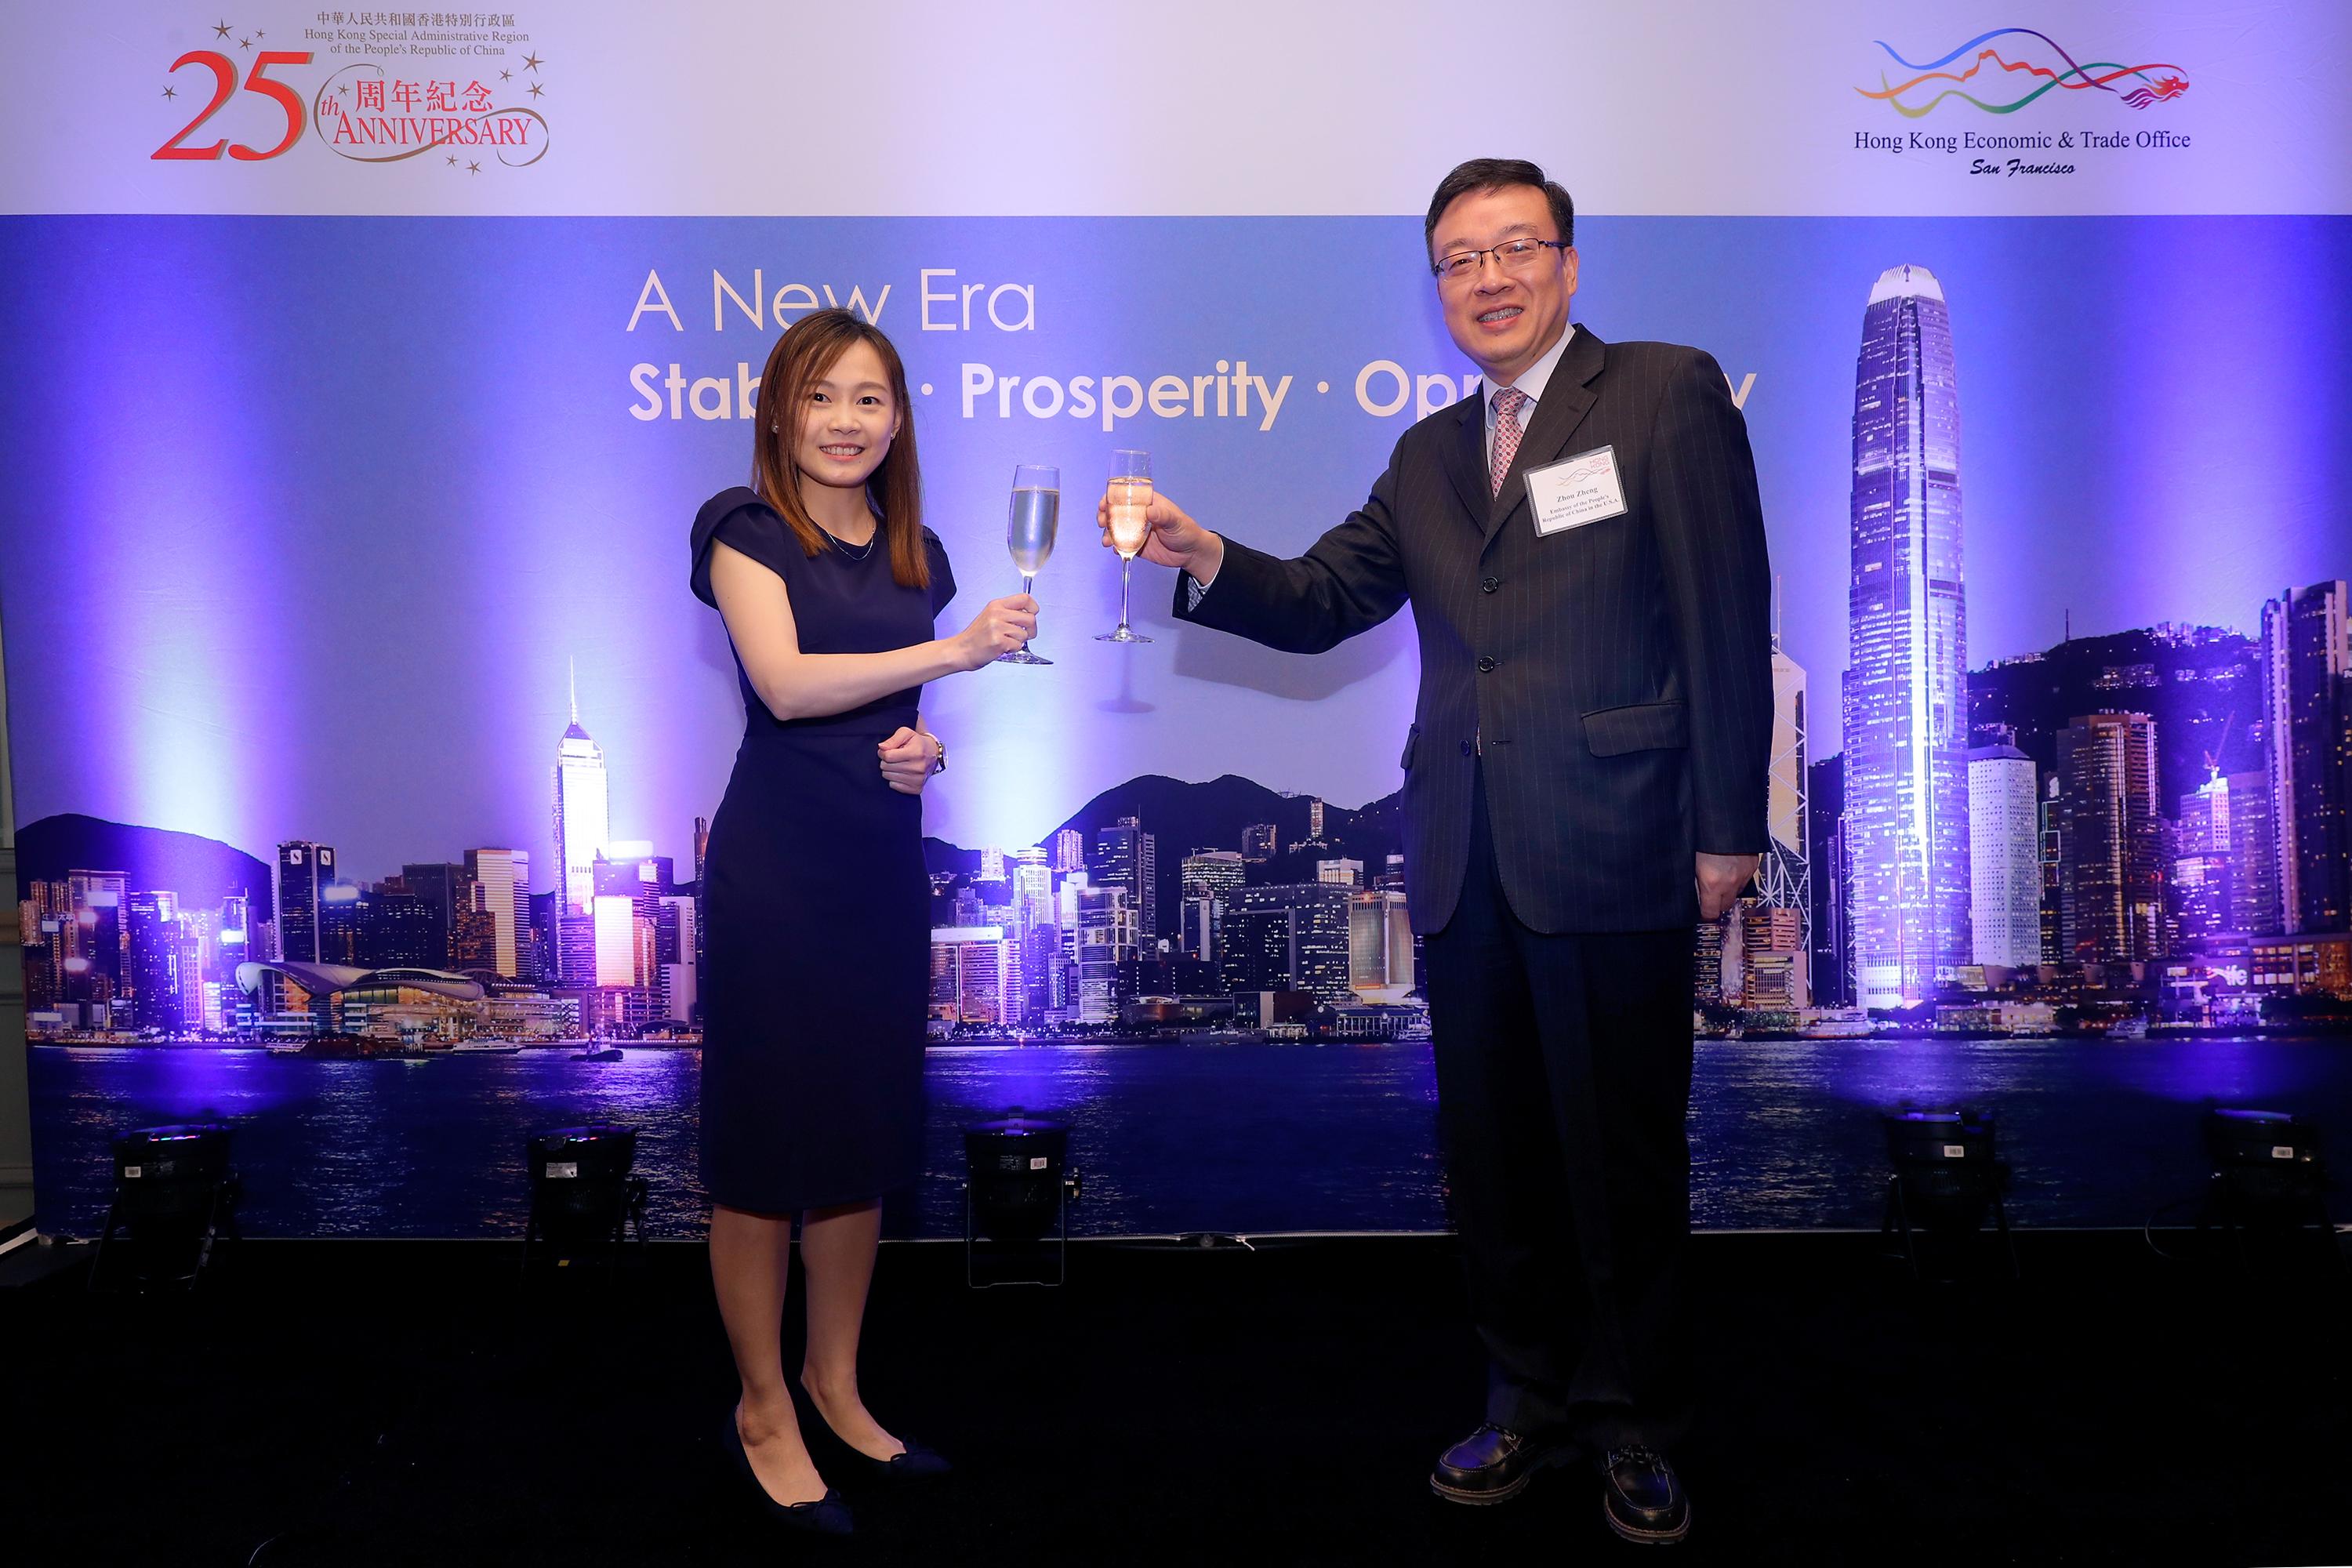 The Deputy Director of the Hong Kong Economic and Trade Office in San Francisco, Ms Emily Ng (left), and the Minister-counselor of the Embassy of the People's Republic of China in the United States of America, Mr Zhou Zheng (right), propose a toast at a reception celebrating the 25th anniversary of the establishment of the Hong Kong Special Administrative Region in Houston, Texas, on September 21 (Houston time).